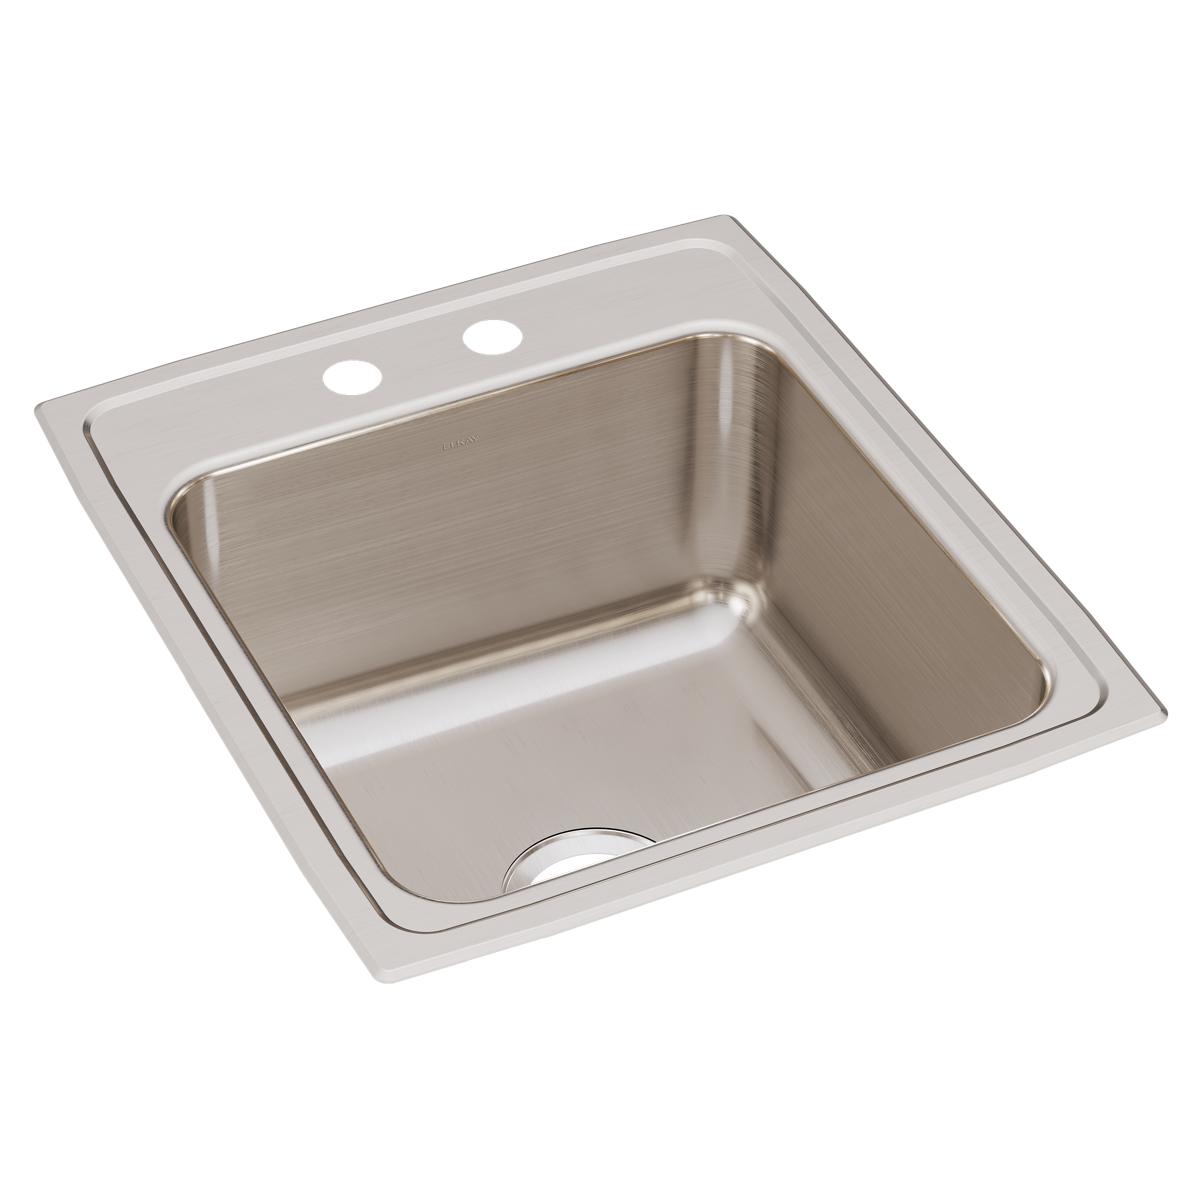 Elkay Lustertone Classic 19-1/2" x 22" x 10-1/8" Single Bowl Drop-in Sink with Quick-clip